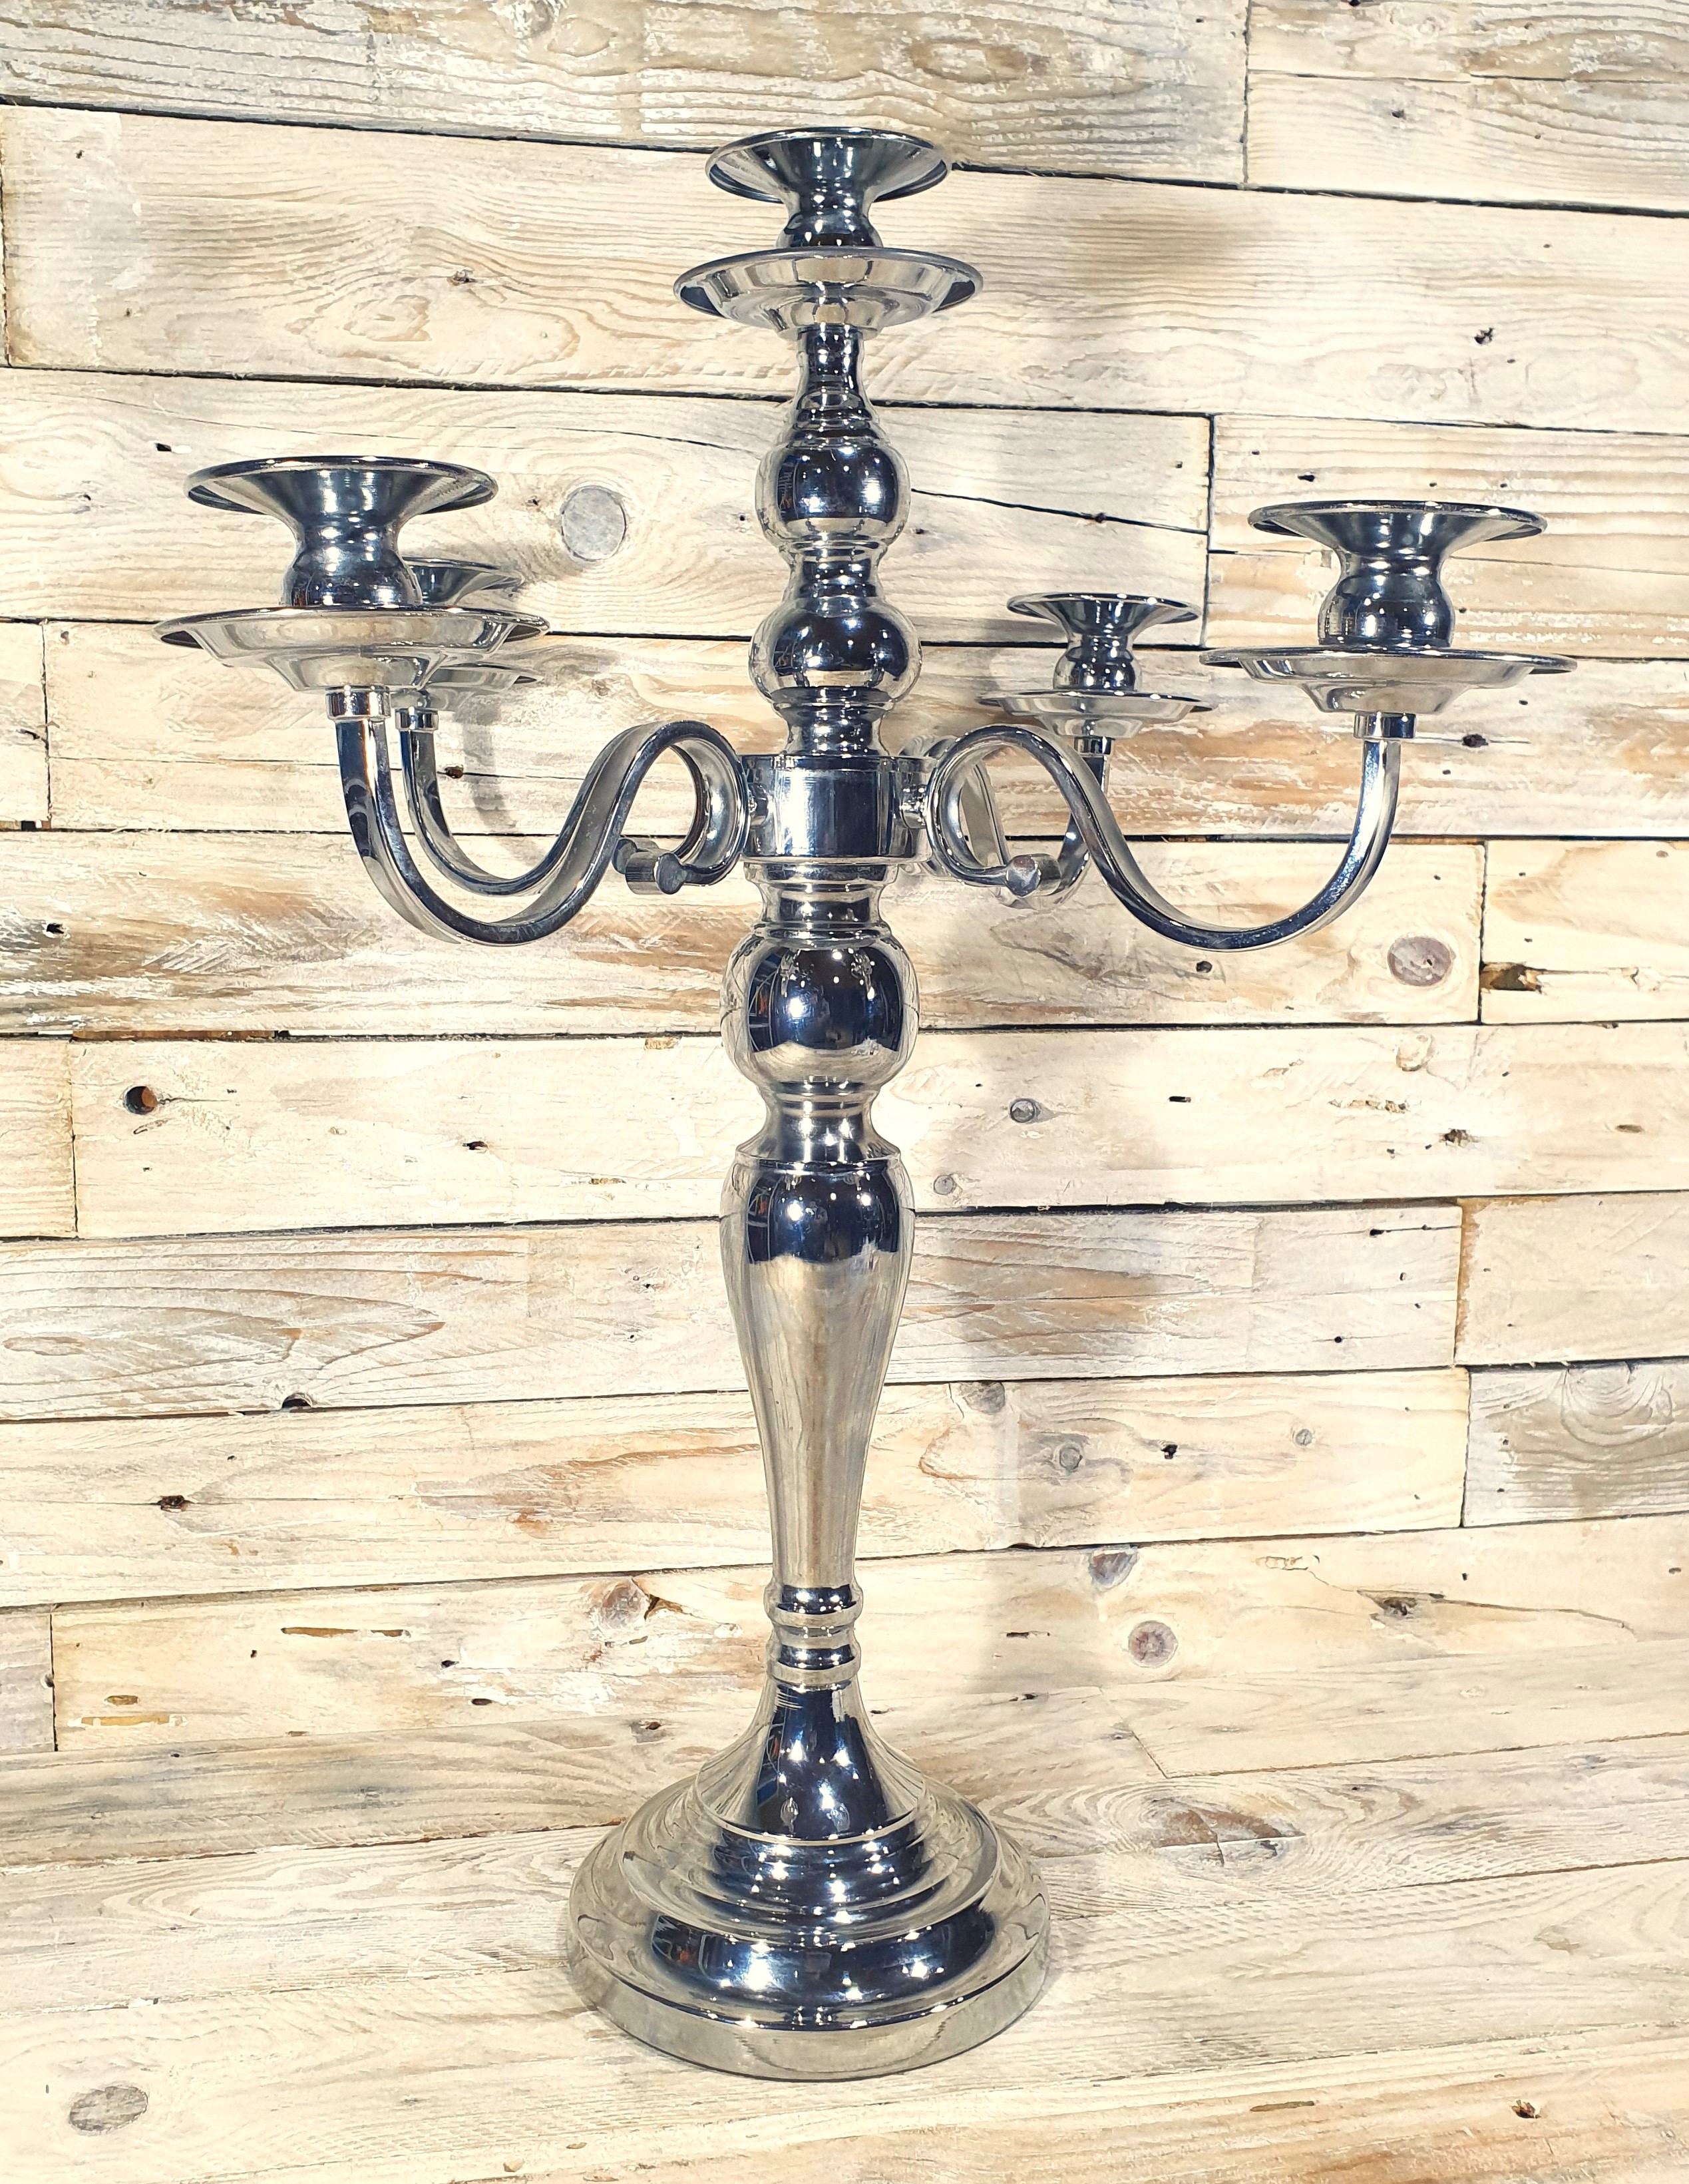 Tall Stainless Steel 5 Pot Table Candelabra Candle Holder 48cm x 33cm x 33cm Rrp £99 - Image 2 of 3